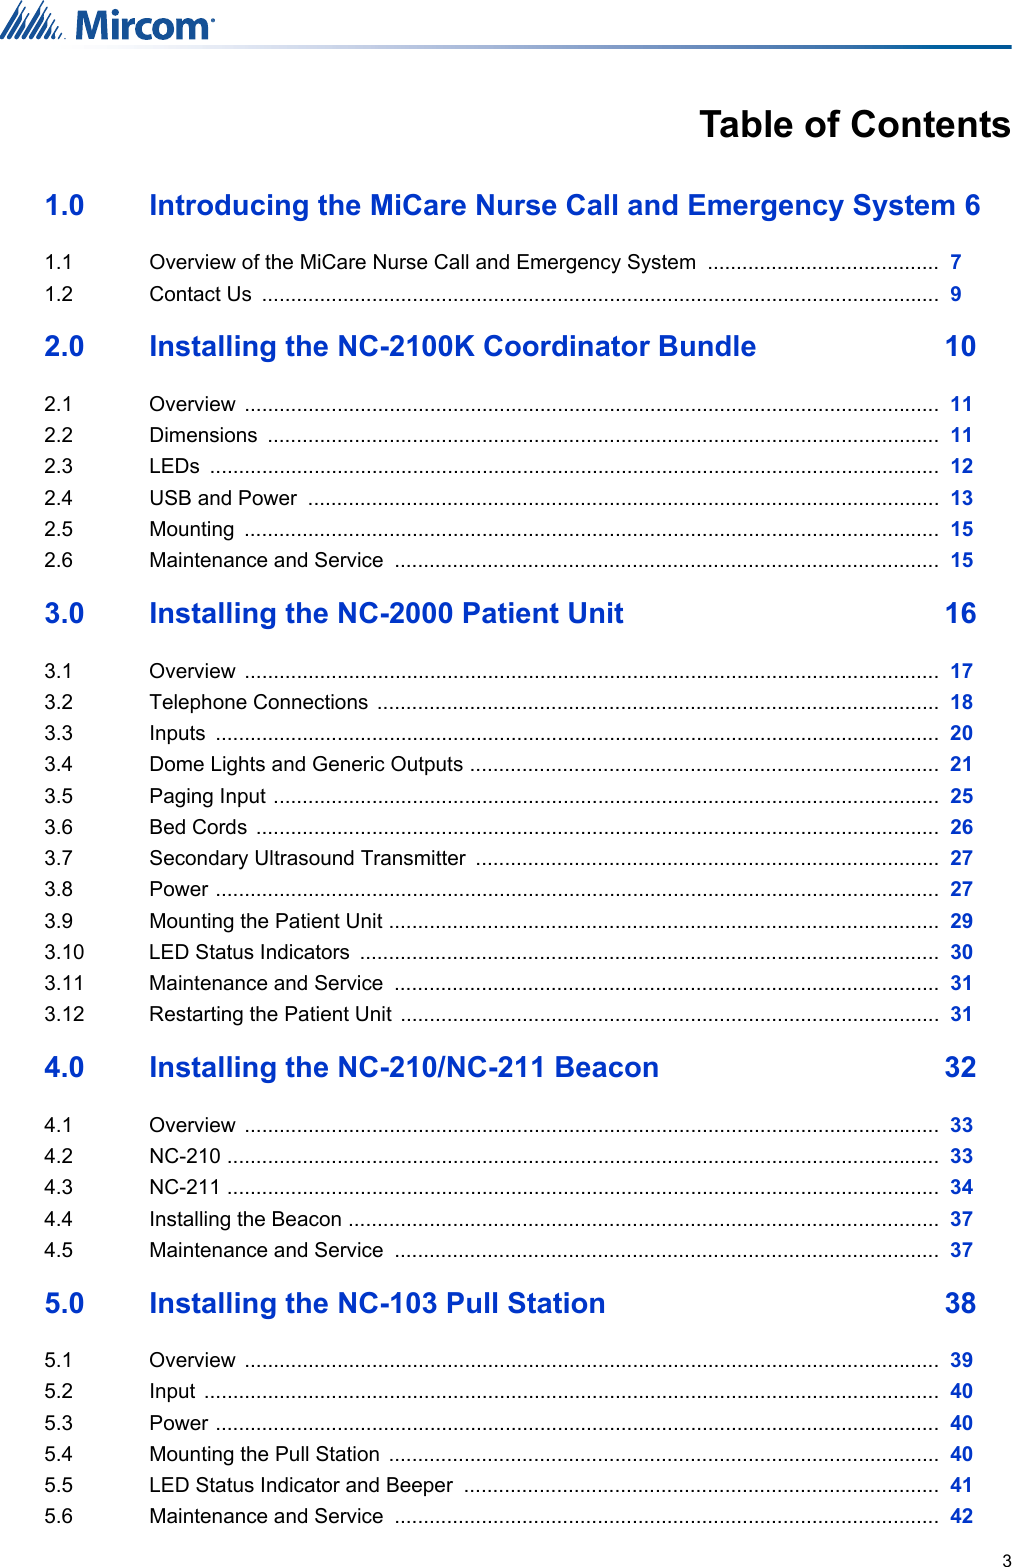 3Table of Contents1.0 Introducing the MiCare Nurse Call and Emergency System 61.1  Overview of the MiCare Nurse Call and Emergency System  ........................................  71.2 Contact Us  .....................................................................................................................  92.0 Installing the NC-2100K Coordinator Bundle  102.1 Overview ........................................................................................................................  112.2 Dimensions ....................................................................................................................  112.3 LEDs ..............................................................................................................................  122.4 USB and Power  .............................................................................................................  132.5 Mounting ........................................................................................................................  152.6 Maintenance and Service  ..............................................................................................  153.0 Installing the NC-2000 Patient Unit  163.1 Overview ........................................................................................................................  173.2 Telephone Connections  .................................................................................................  183.3 Inputs .............................................................................................................................  203.4 Dome Lights and Generic Outputs .................................................................................  213.5 Paging Input ...................................................................................................................  253.6 Bed Cords  ......................................................................................................................  263.7 Secondary Ultrasound Transmitter  ................................................................................  273.8 Power .............................................................................................................................  273.9 Mounting the Patient Unit ...............................................................................................  293.10 LED Status Indicators  ....................................................................................................  303.11 Maintenance and Service  ..............................................................................................  313.12 Restarting the Patient Unit  .............................................................................................  314.0 Installing the NC-210/NC-211 Beacon  324.1 Overview ........................................................................................................................  334.2 NC-210 ...........................................................................................................................  334.3 NC-211 ...........................................................................................................................  344.4 Installing the Beacon ......................................................................................................  374.5 Maintenance and Service  ..............................................................................................  375.0 Installing the NC-103 Pull Station  385.1 Overview ........................................................................................................................  395.2 Input ...............................................................................................................................  405.3 Power .............................................................................................................................  405.4 Mounting the Pull Station  ...............................................................................................  405.5 LED Status Indicator and Beeper  ..................................................................................  415.6 Maintenance and Service  ..............................................................................................  42